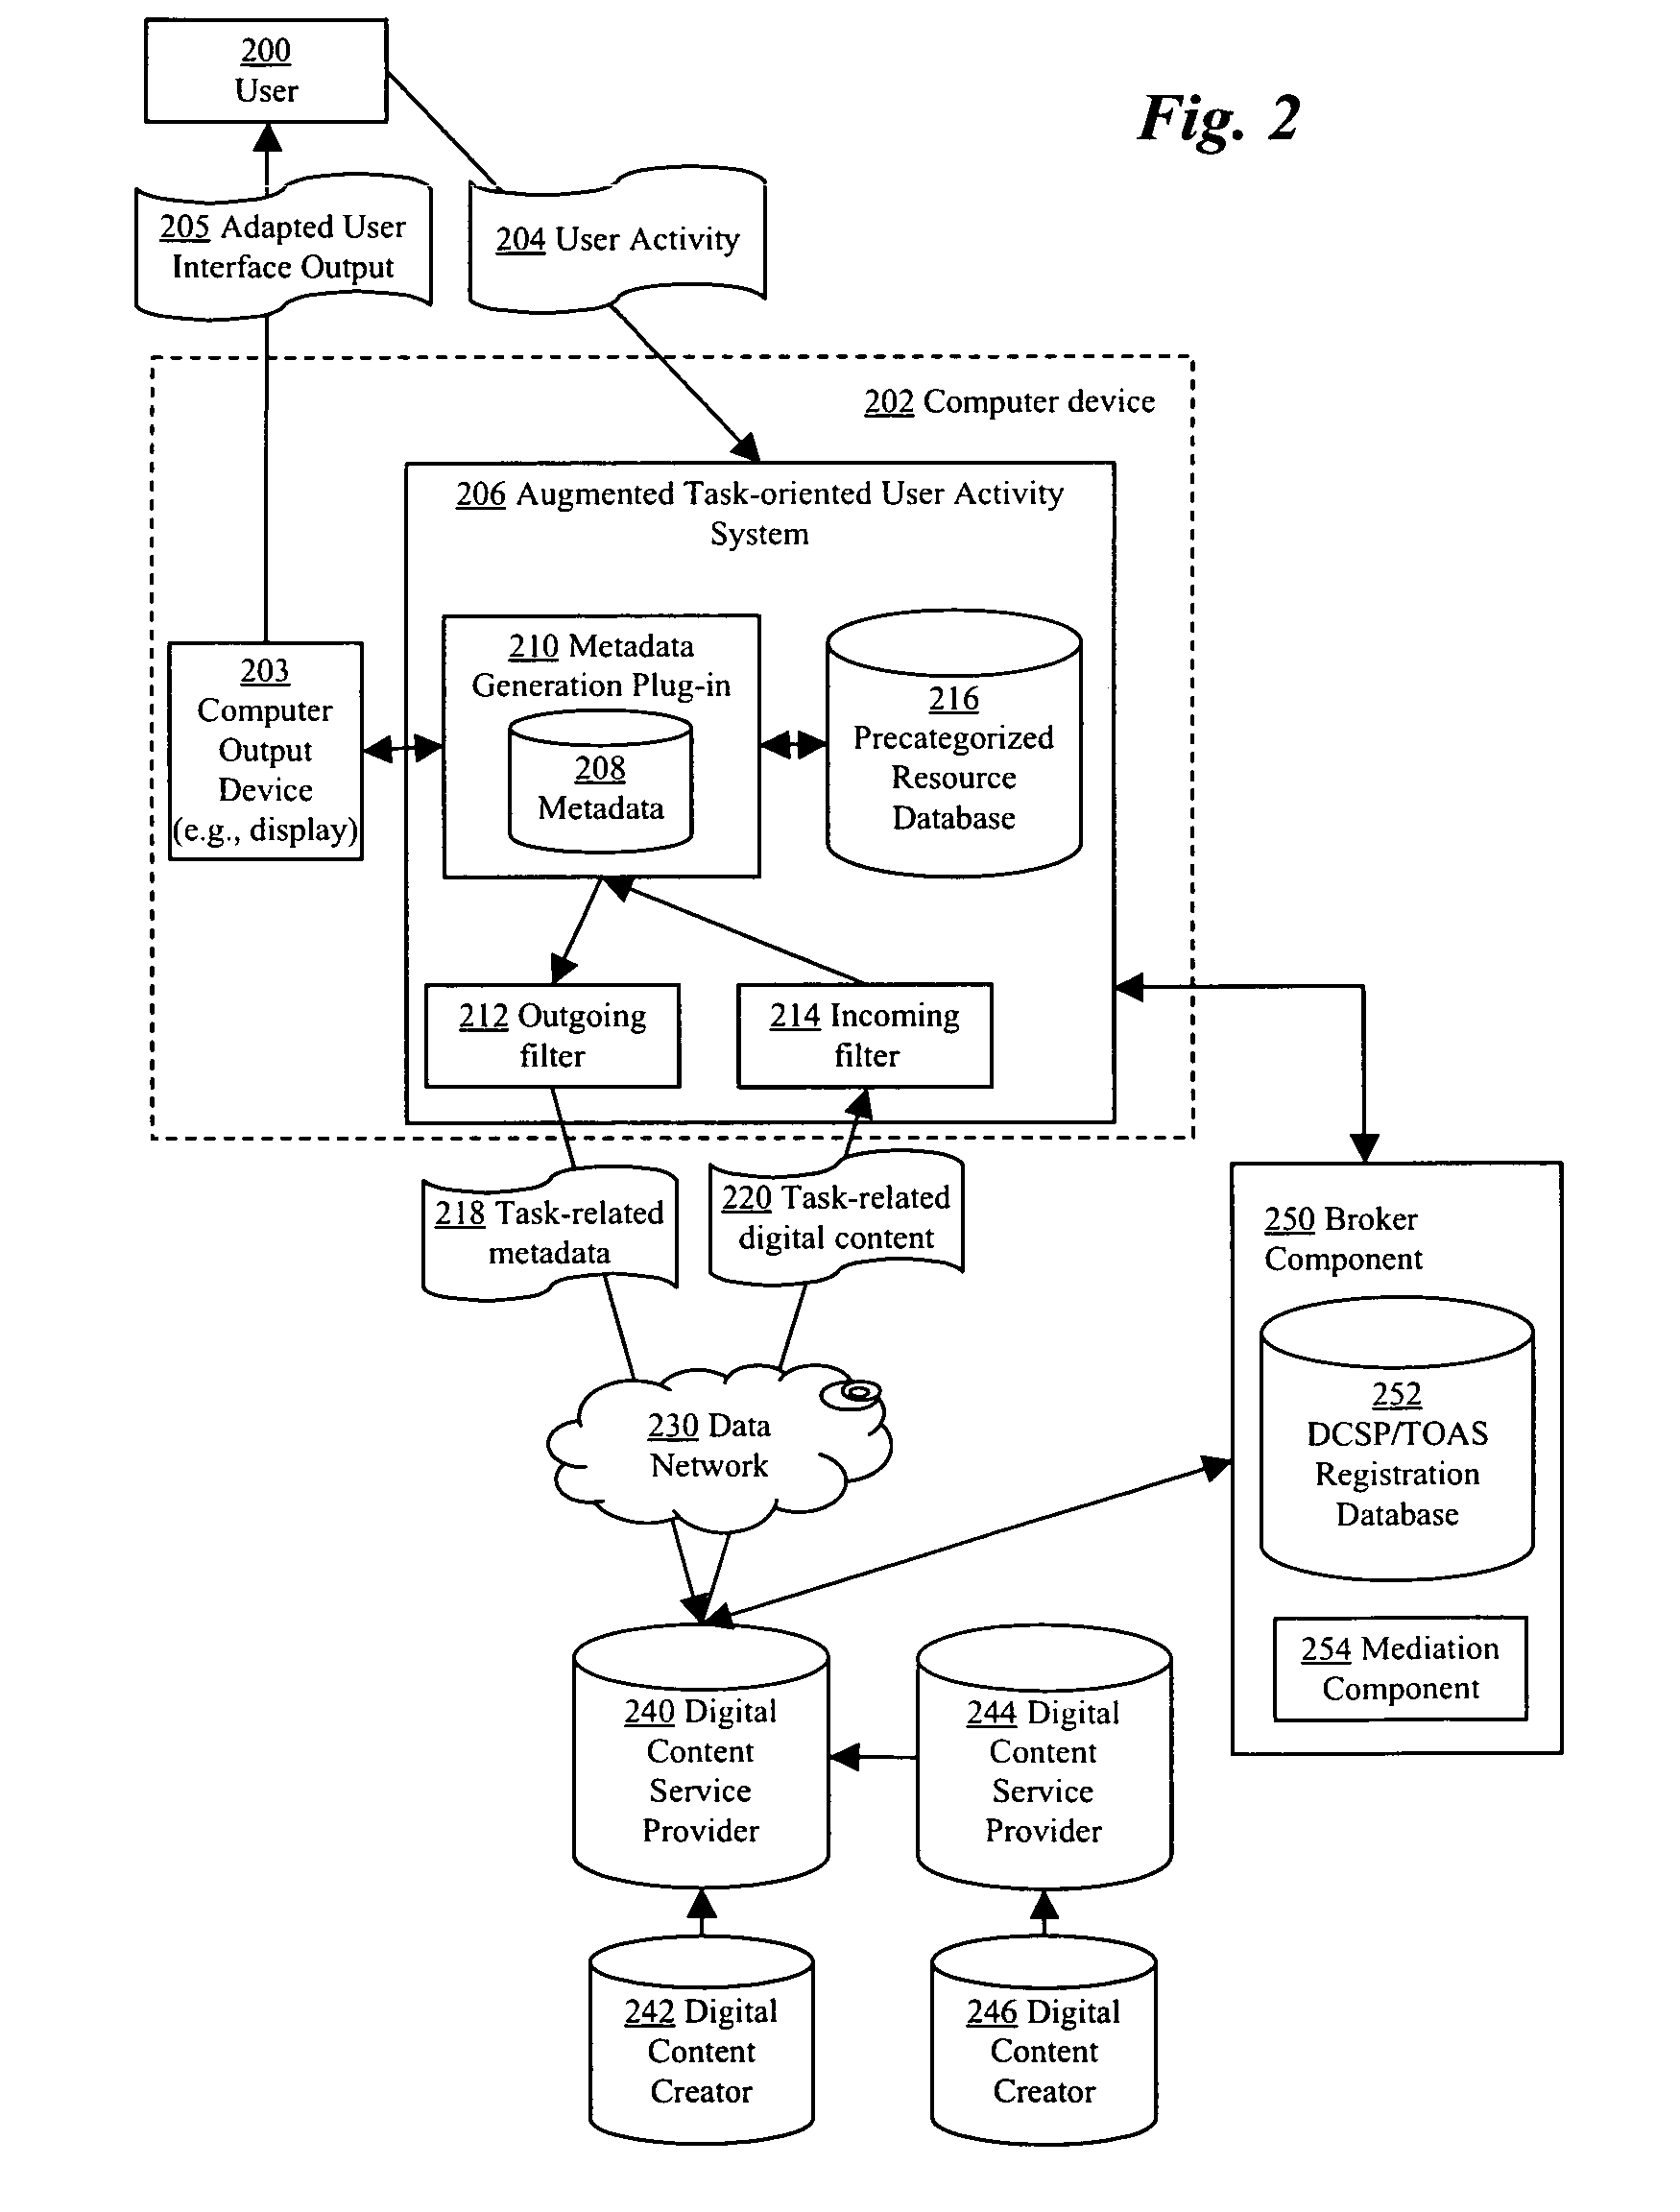 Methods for delivering task-related digital content based on task-oriented user activity